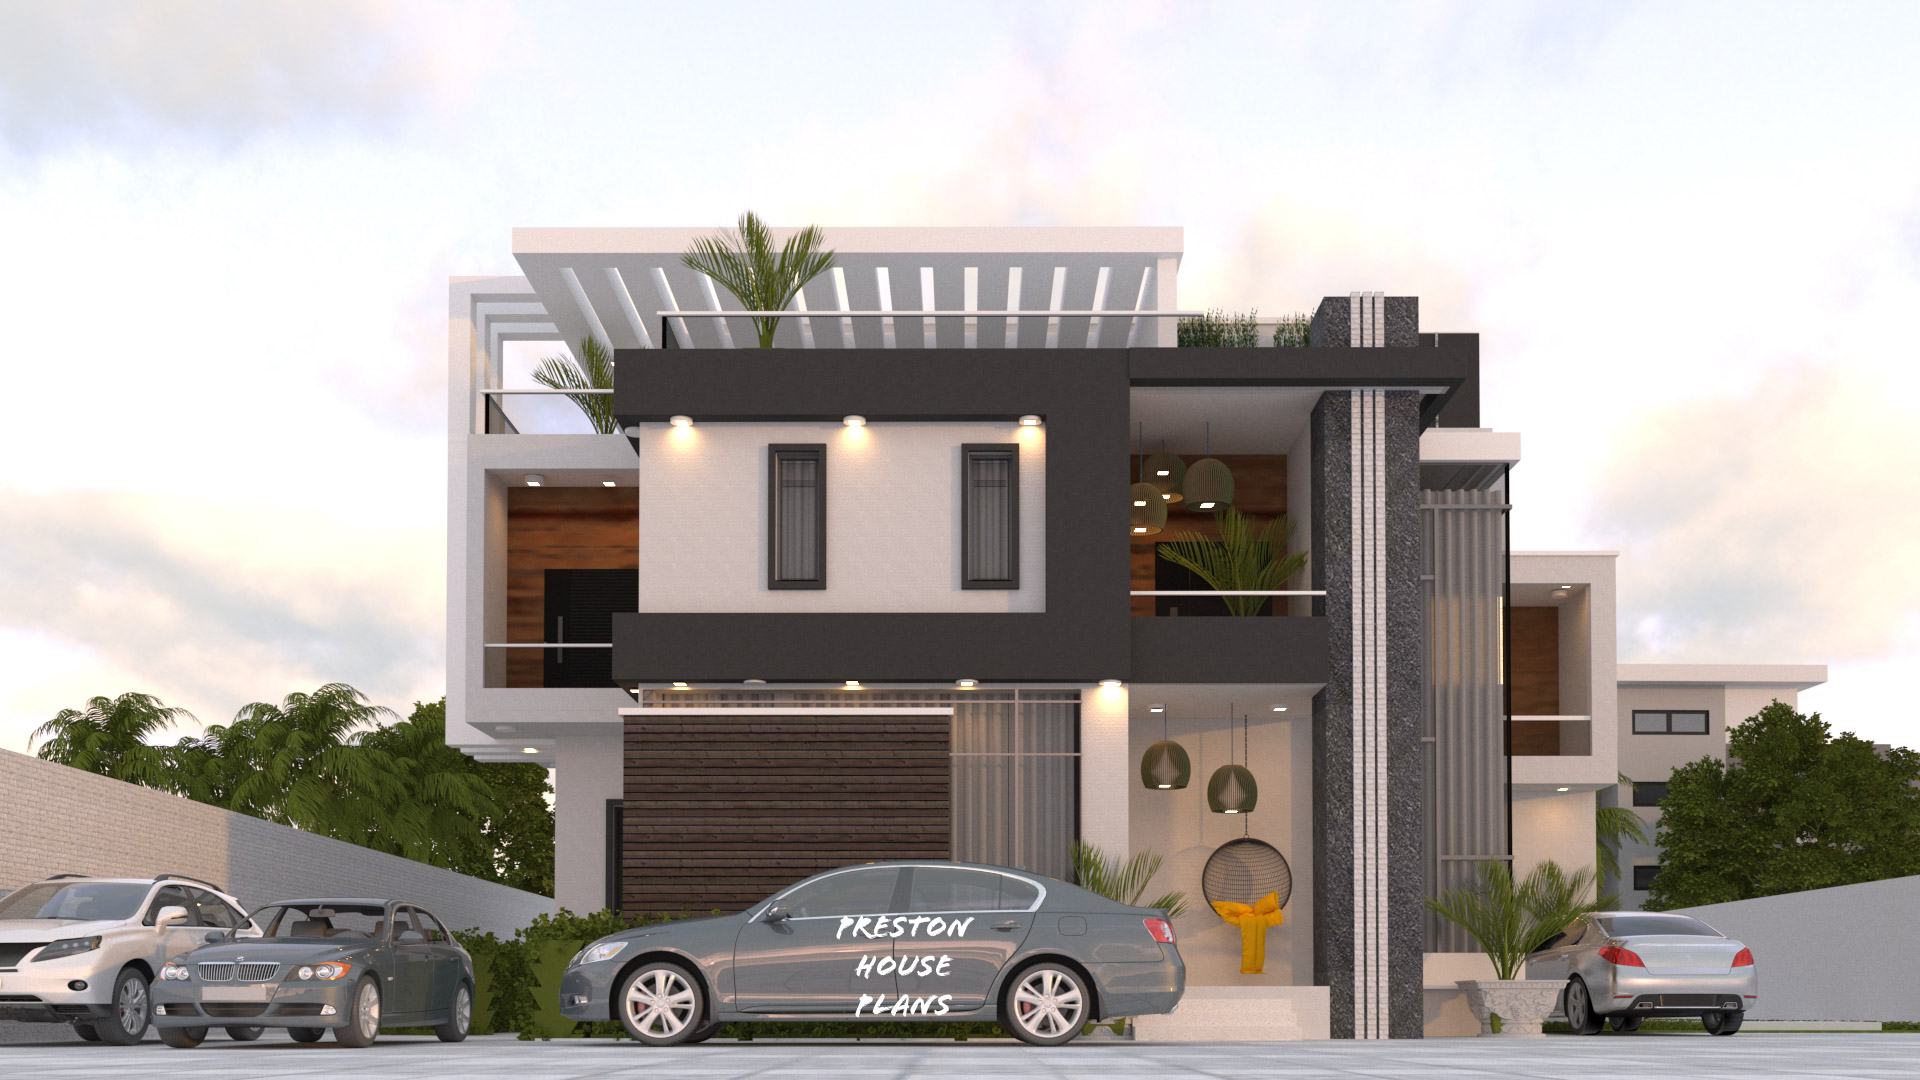 5 Bedroom duplex with a Penthouse